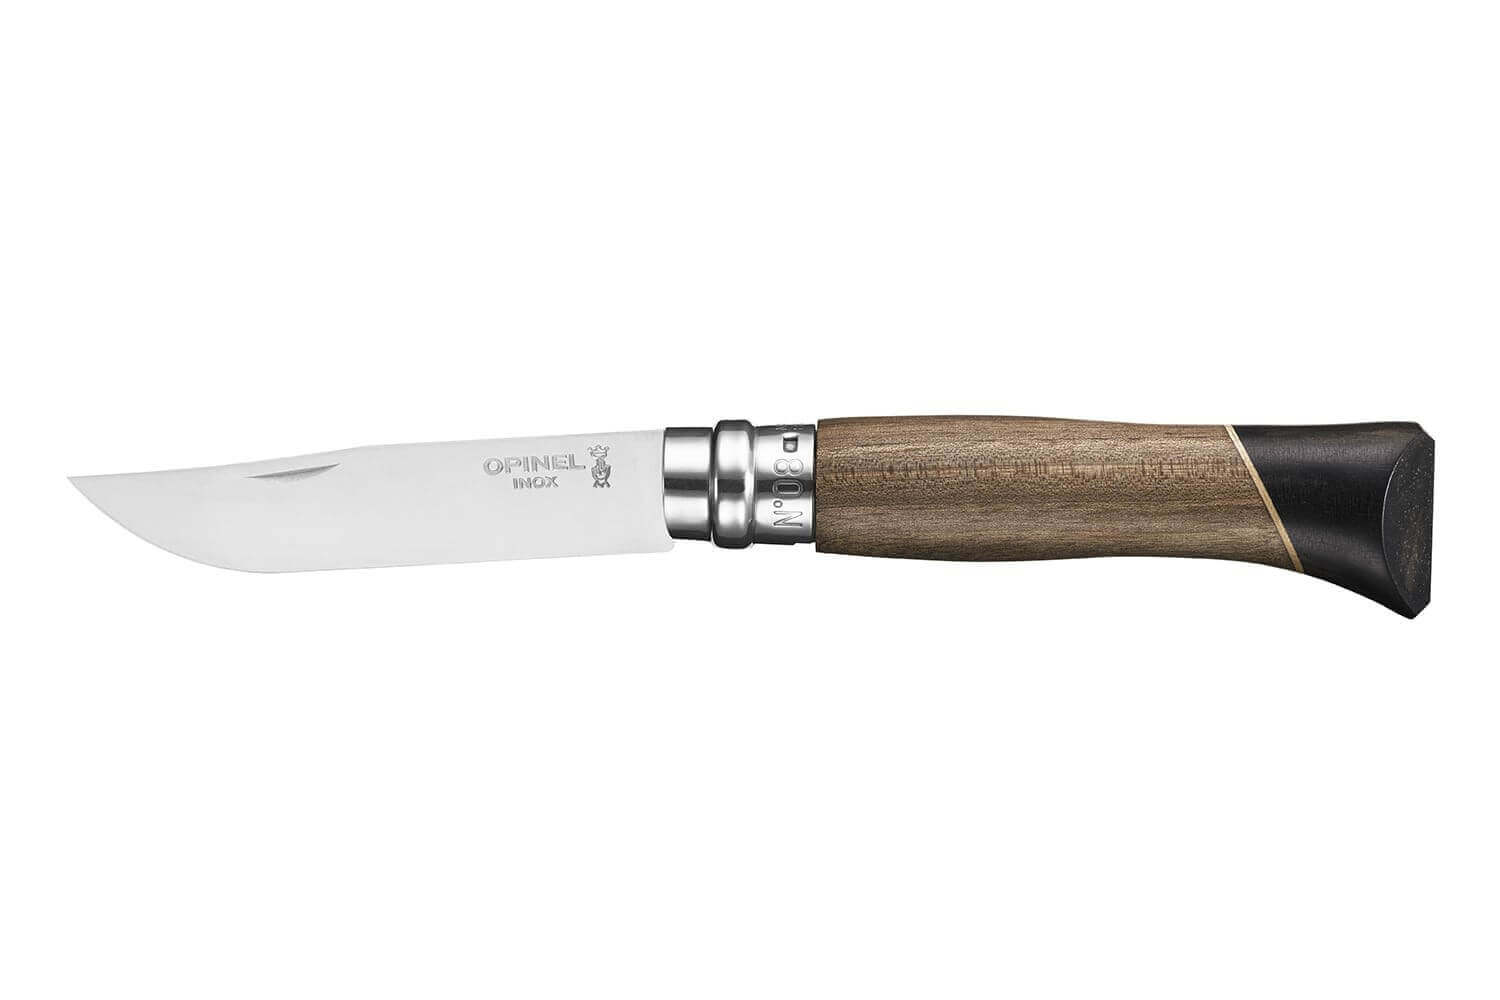 Opinel Couteau éplucheur N°6